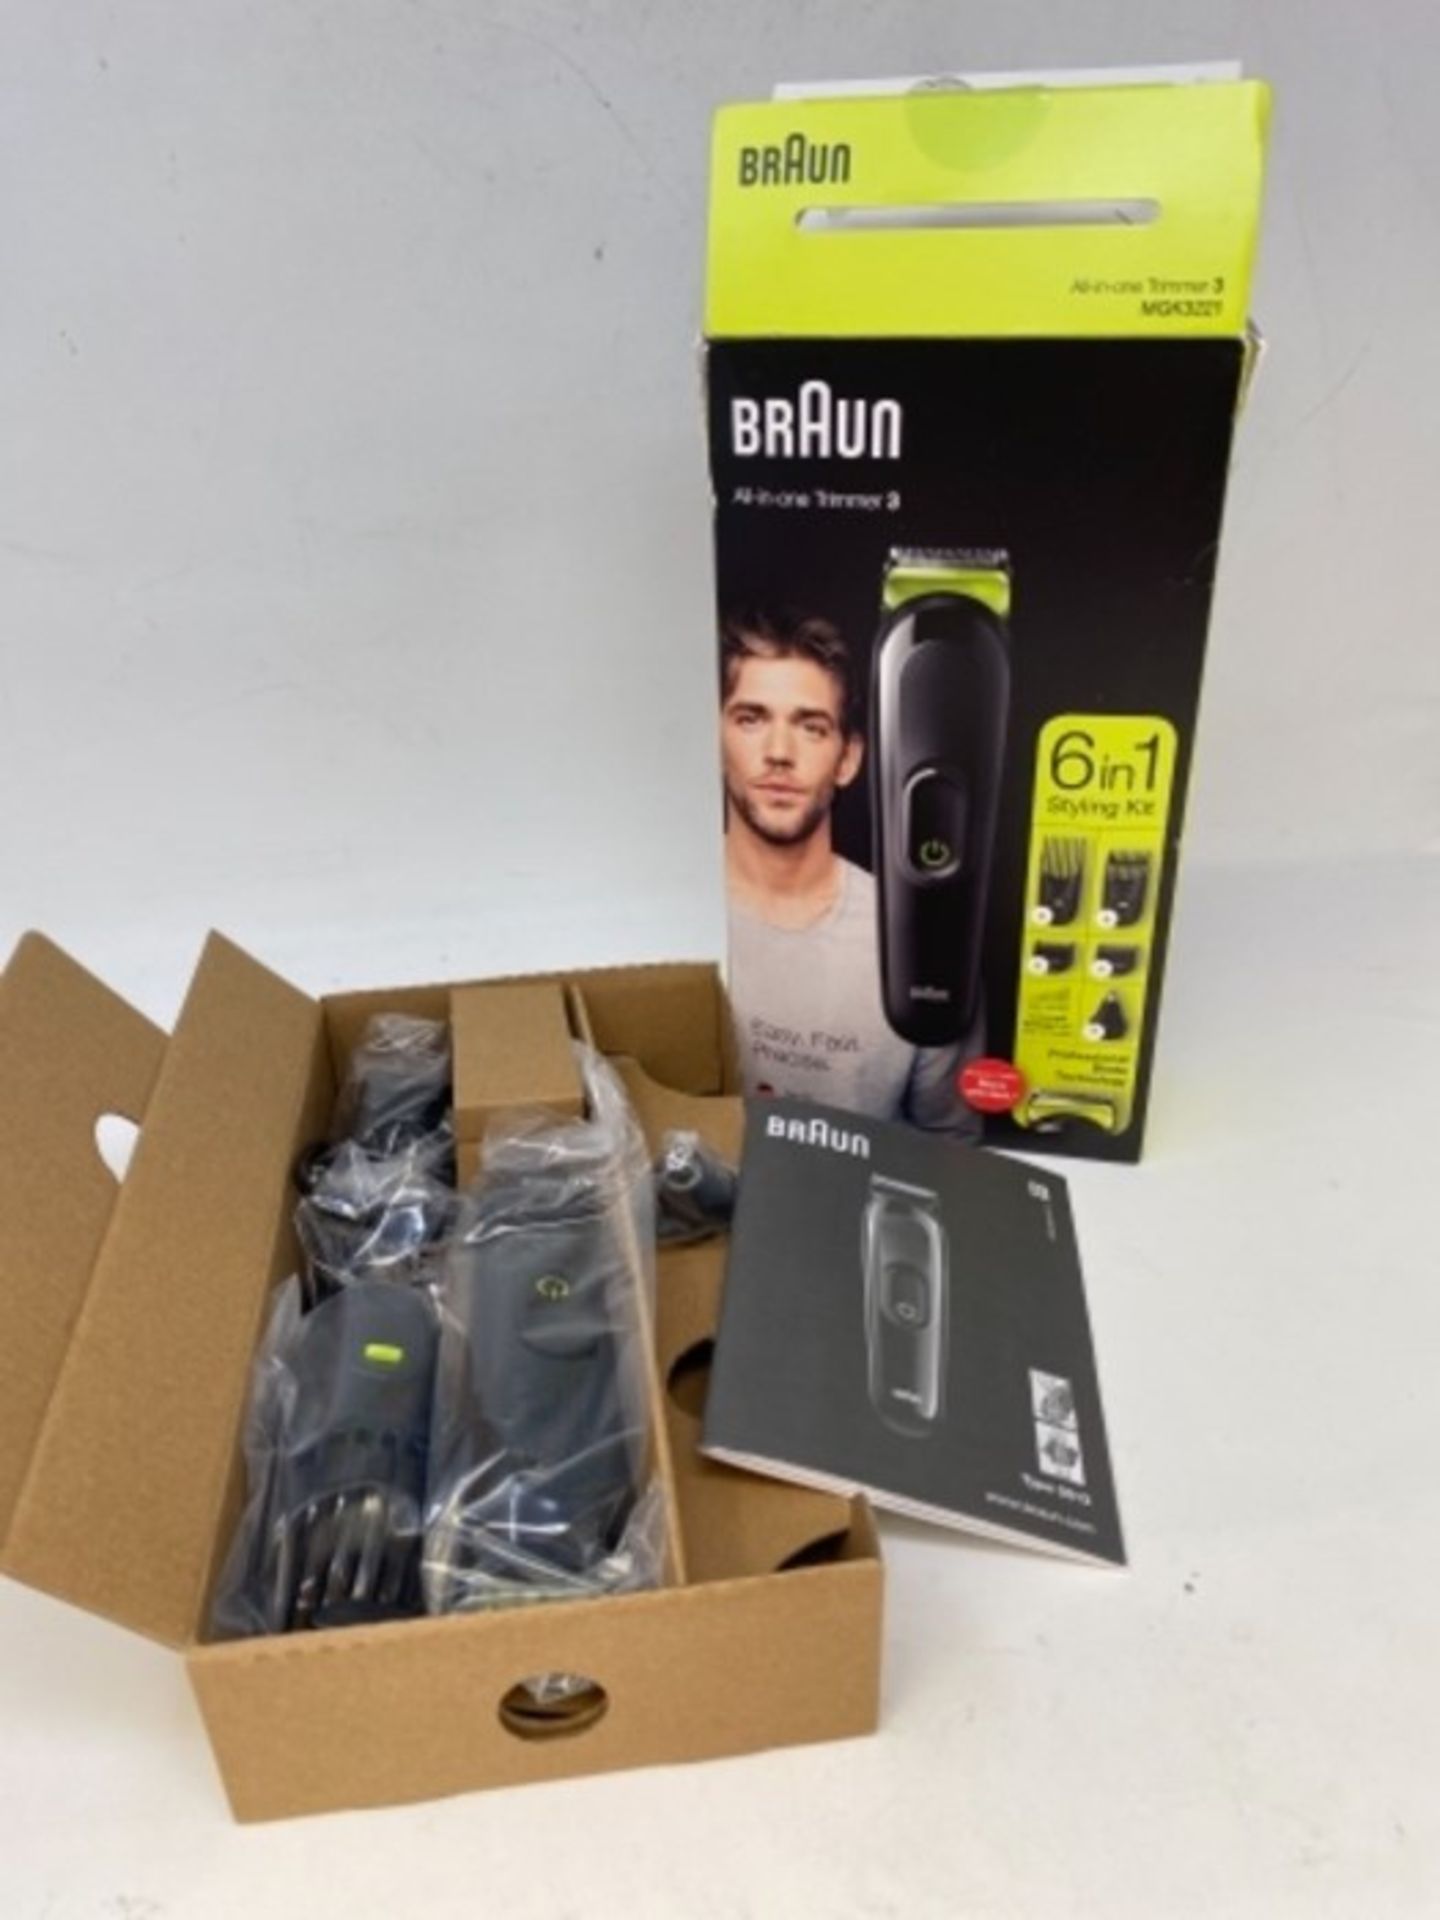 Braun 6-in-1 All-in-one Trimmer 3 MGK3221, Beard Trimmer for Men, Hair Clipper and Fac - Image 2 of 2